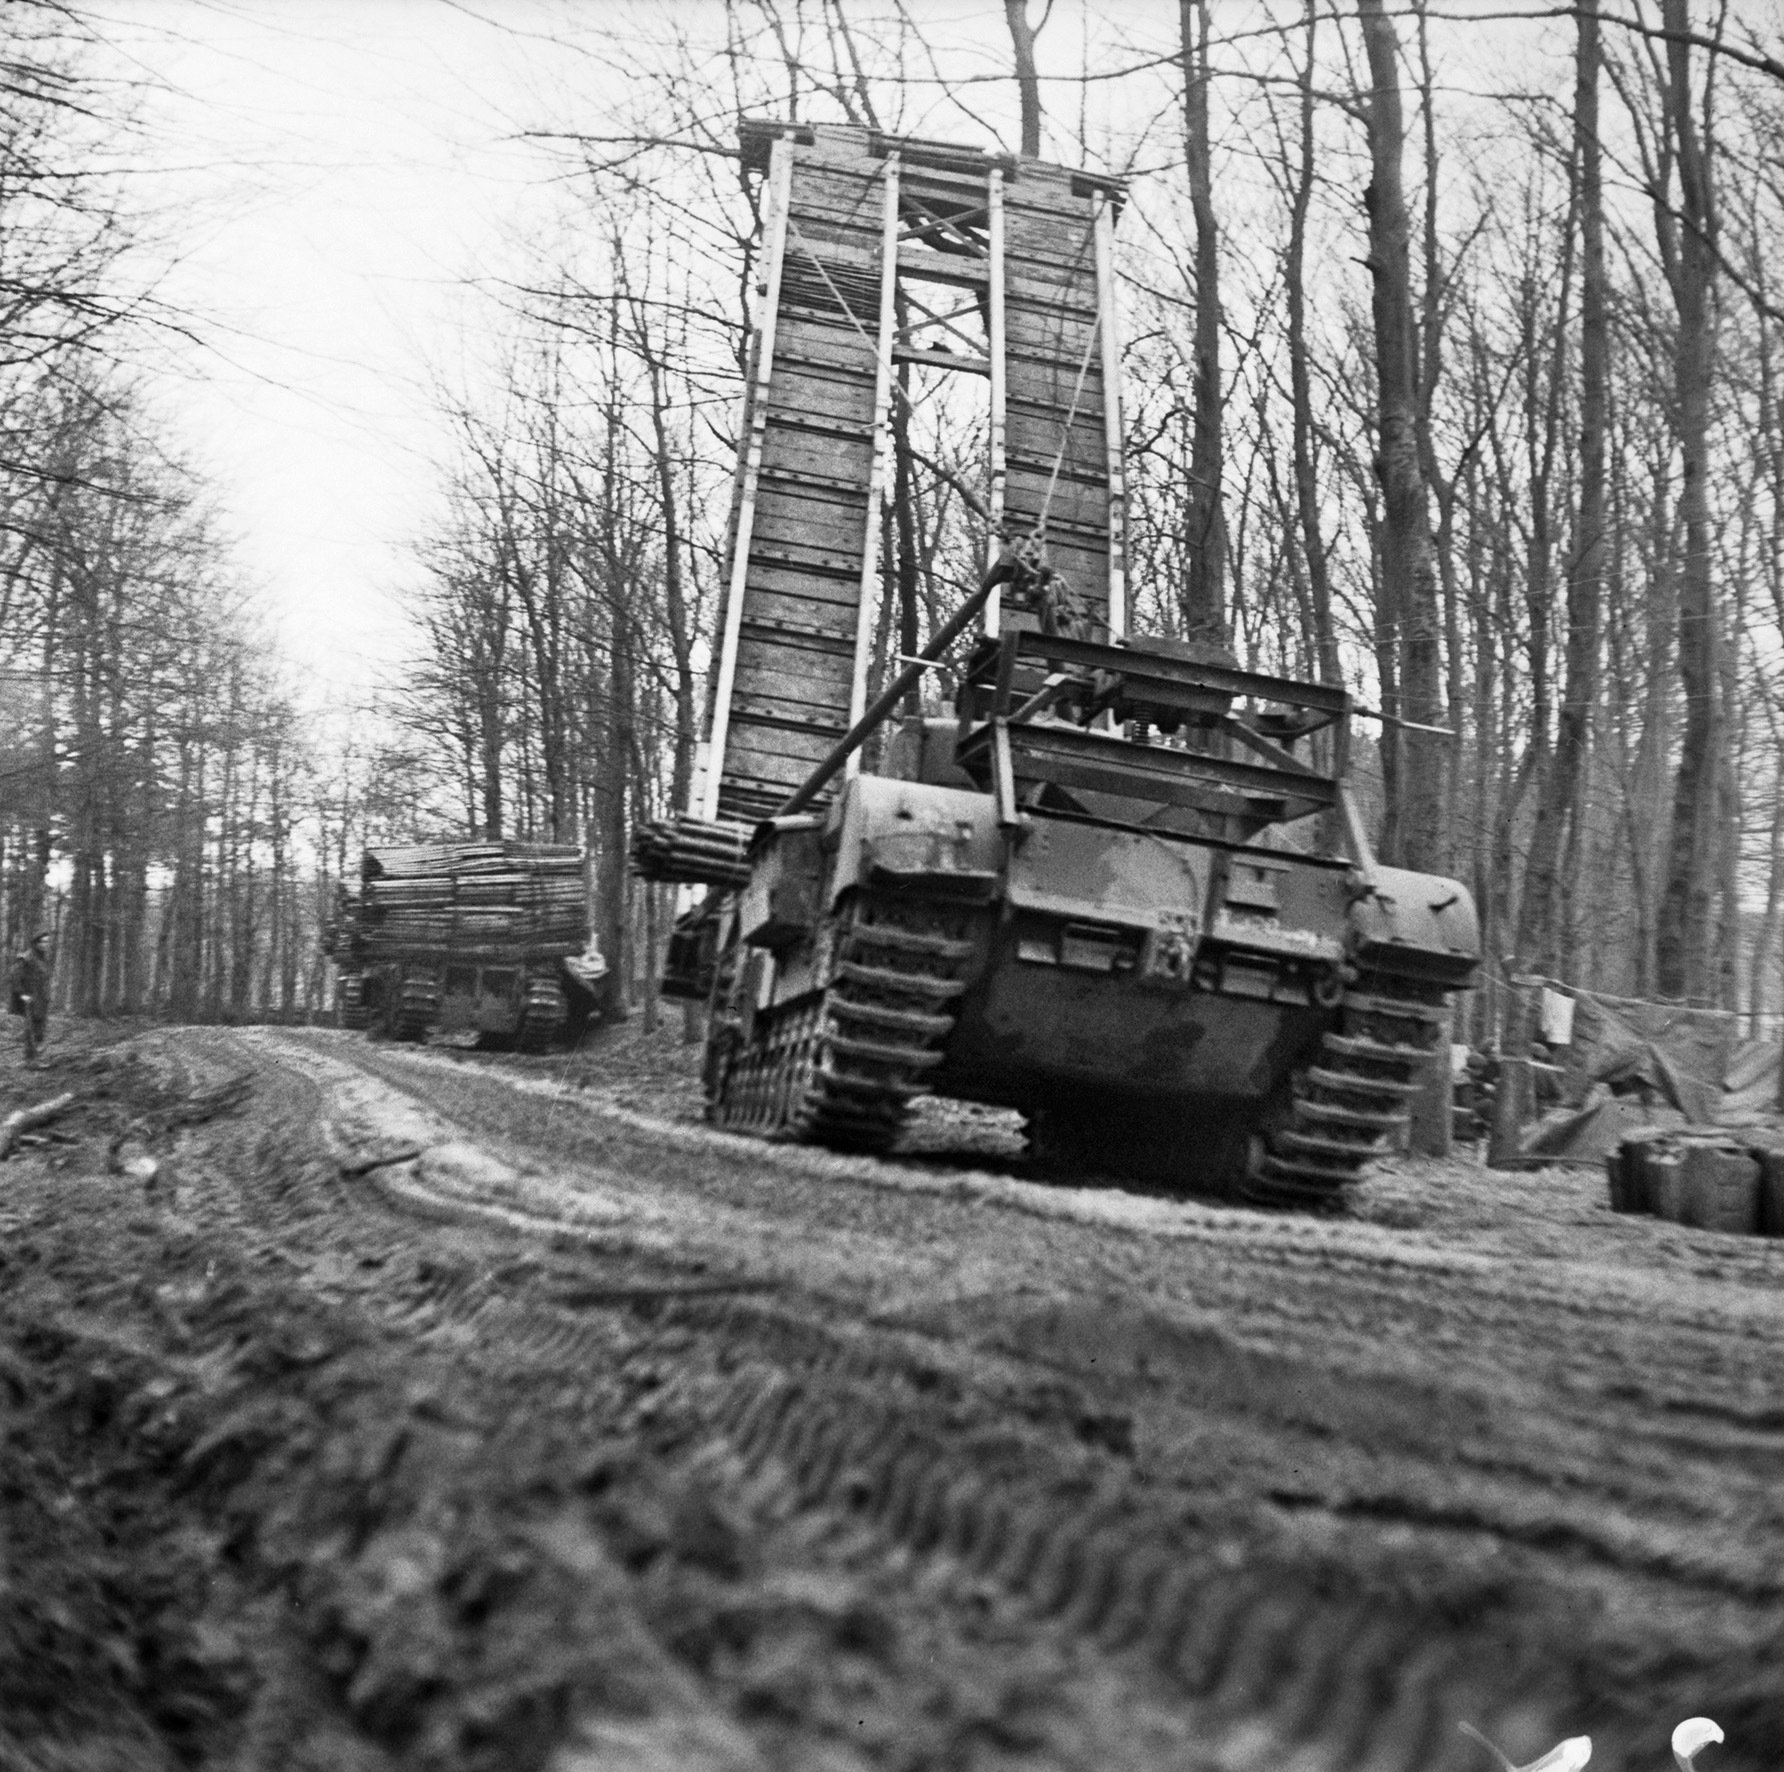 A British Churchill bridge-laying tank and another armored vehicle carrying fascines to be dropped into ditches to allow vehicles to cross ditches and other depressions in the ground follow the road toward the front during the Battle of the Reichswald.  